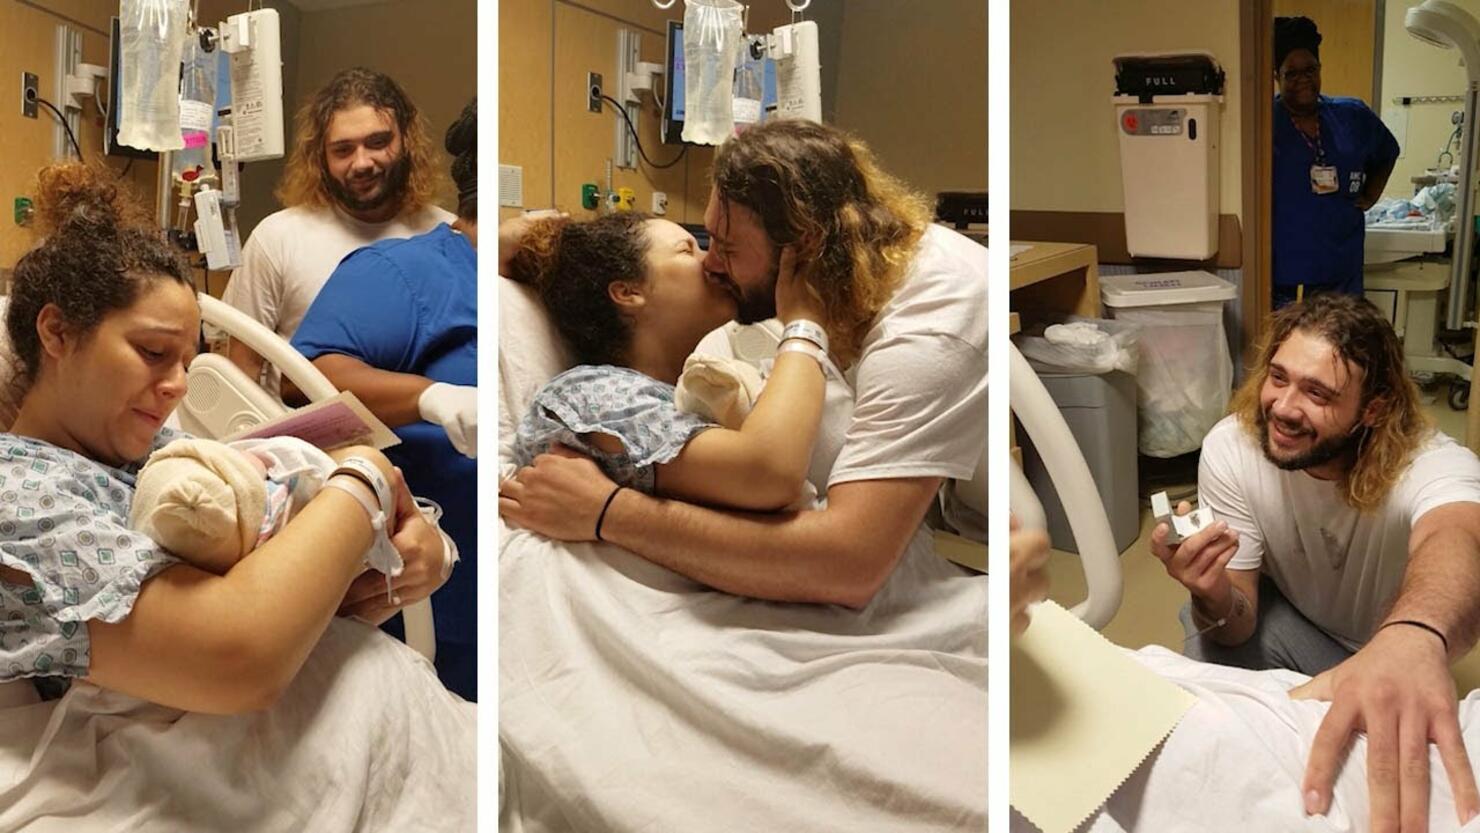 Man Emotionally Proposes To Girlfriend Minutes After She Gives Birth